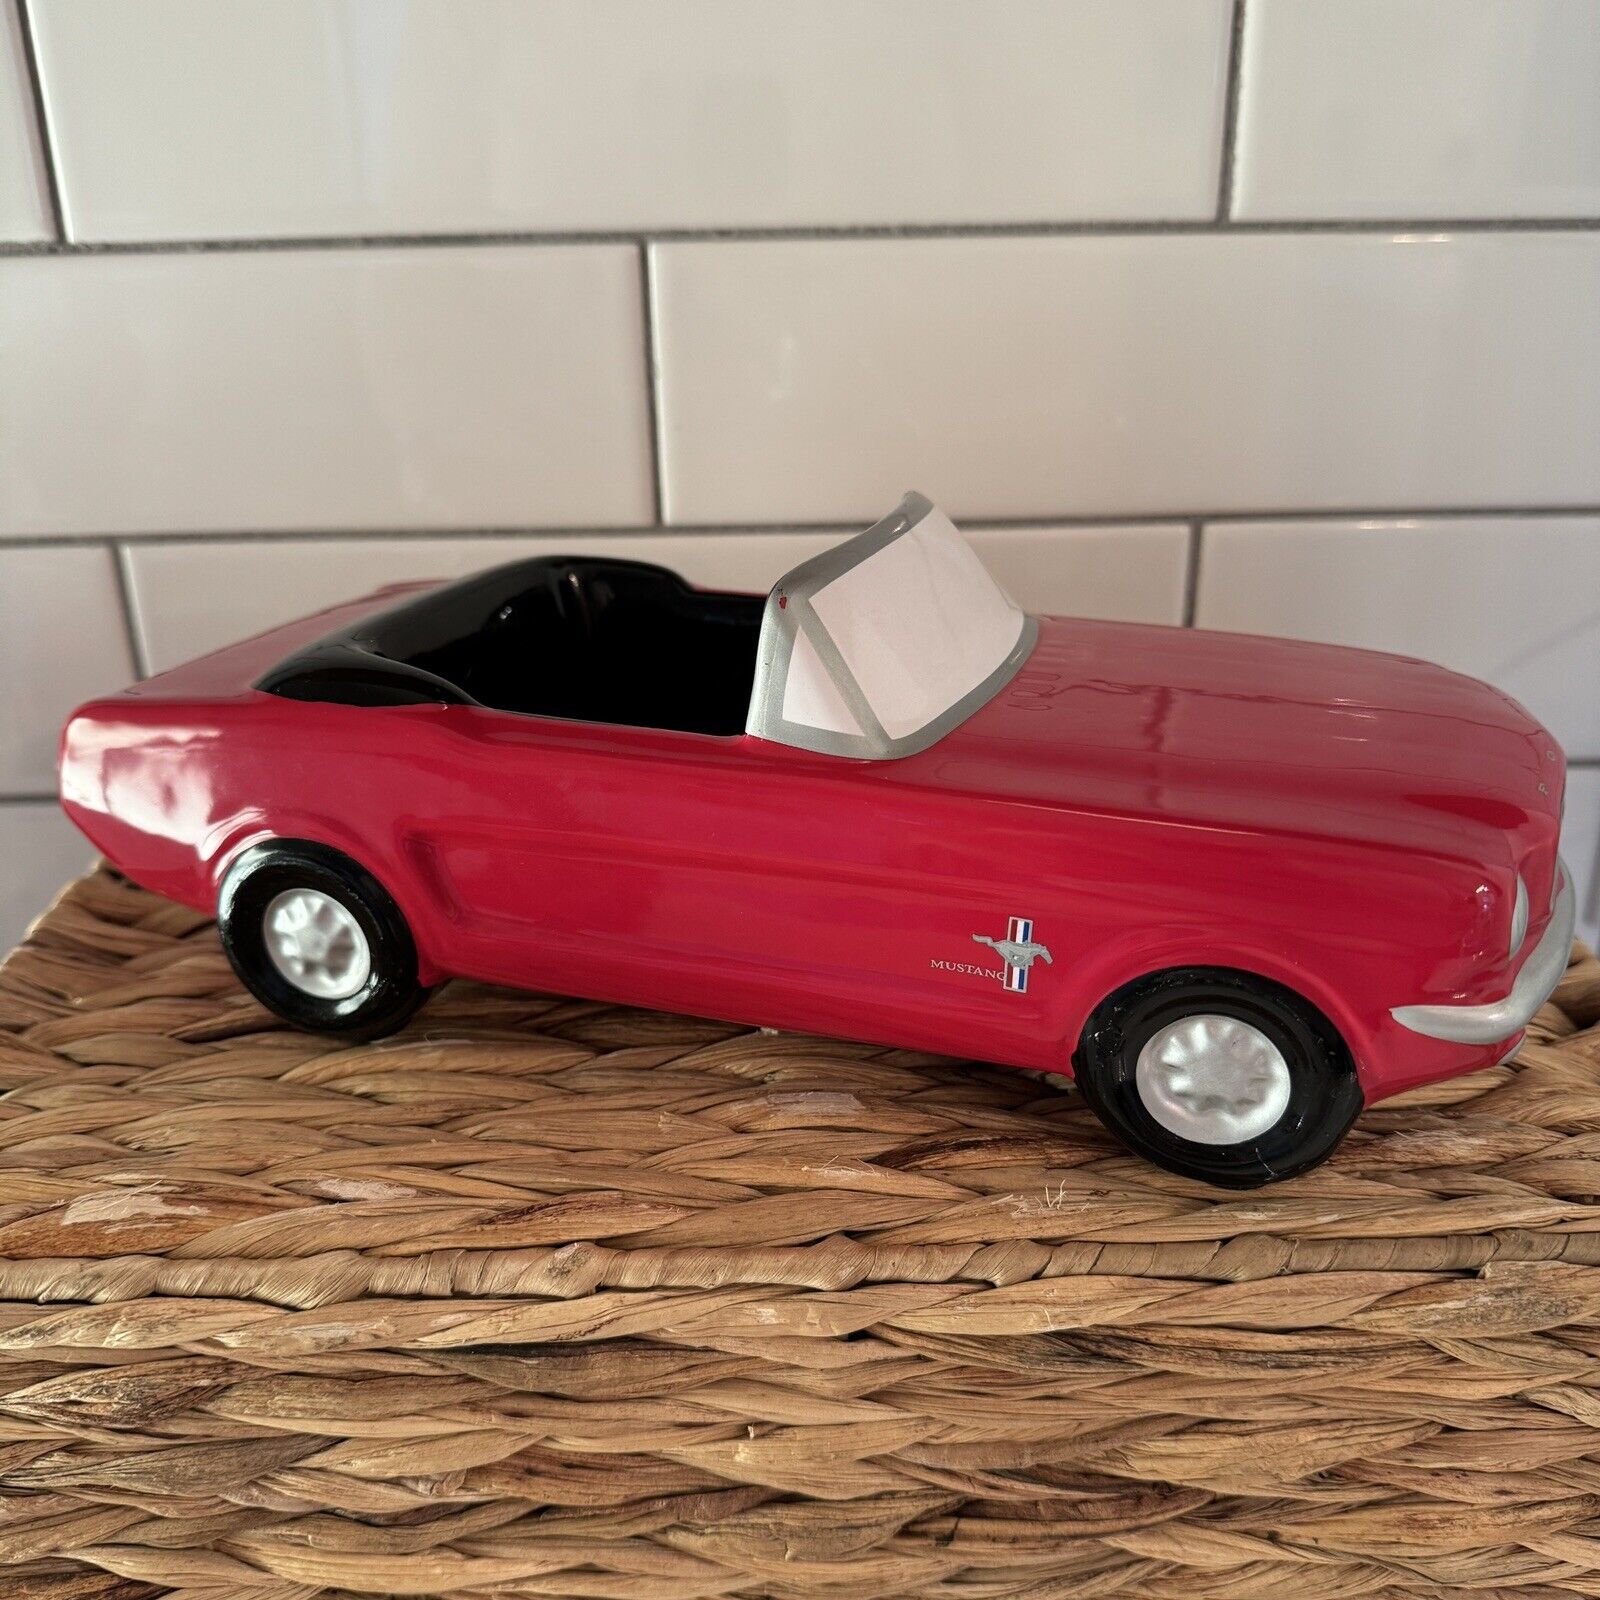 1965 Ford Mustang Convertible Ceramic Muscle Car Planter Vase by Teleflora Gift